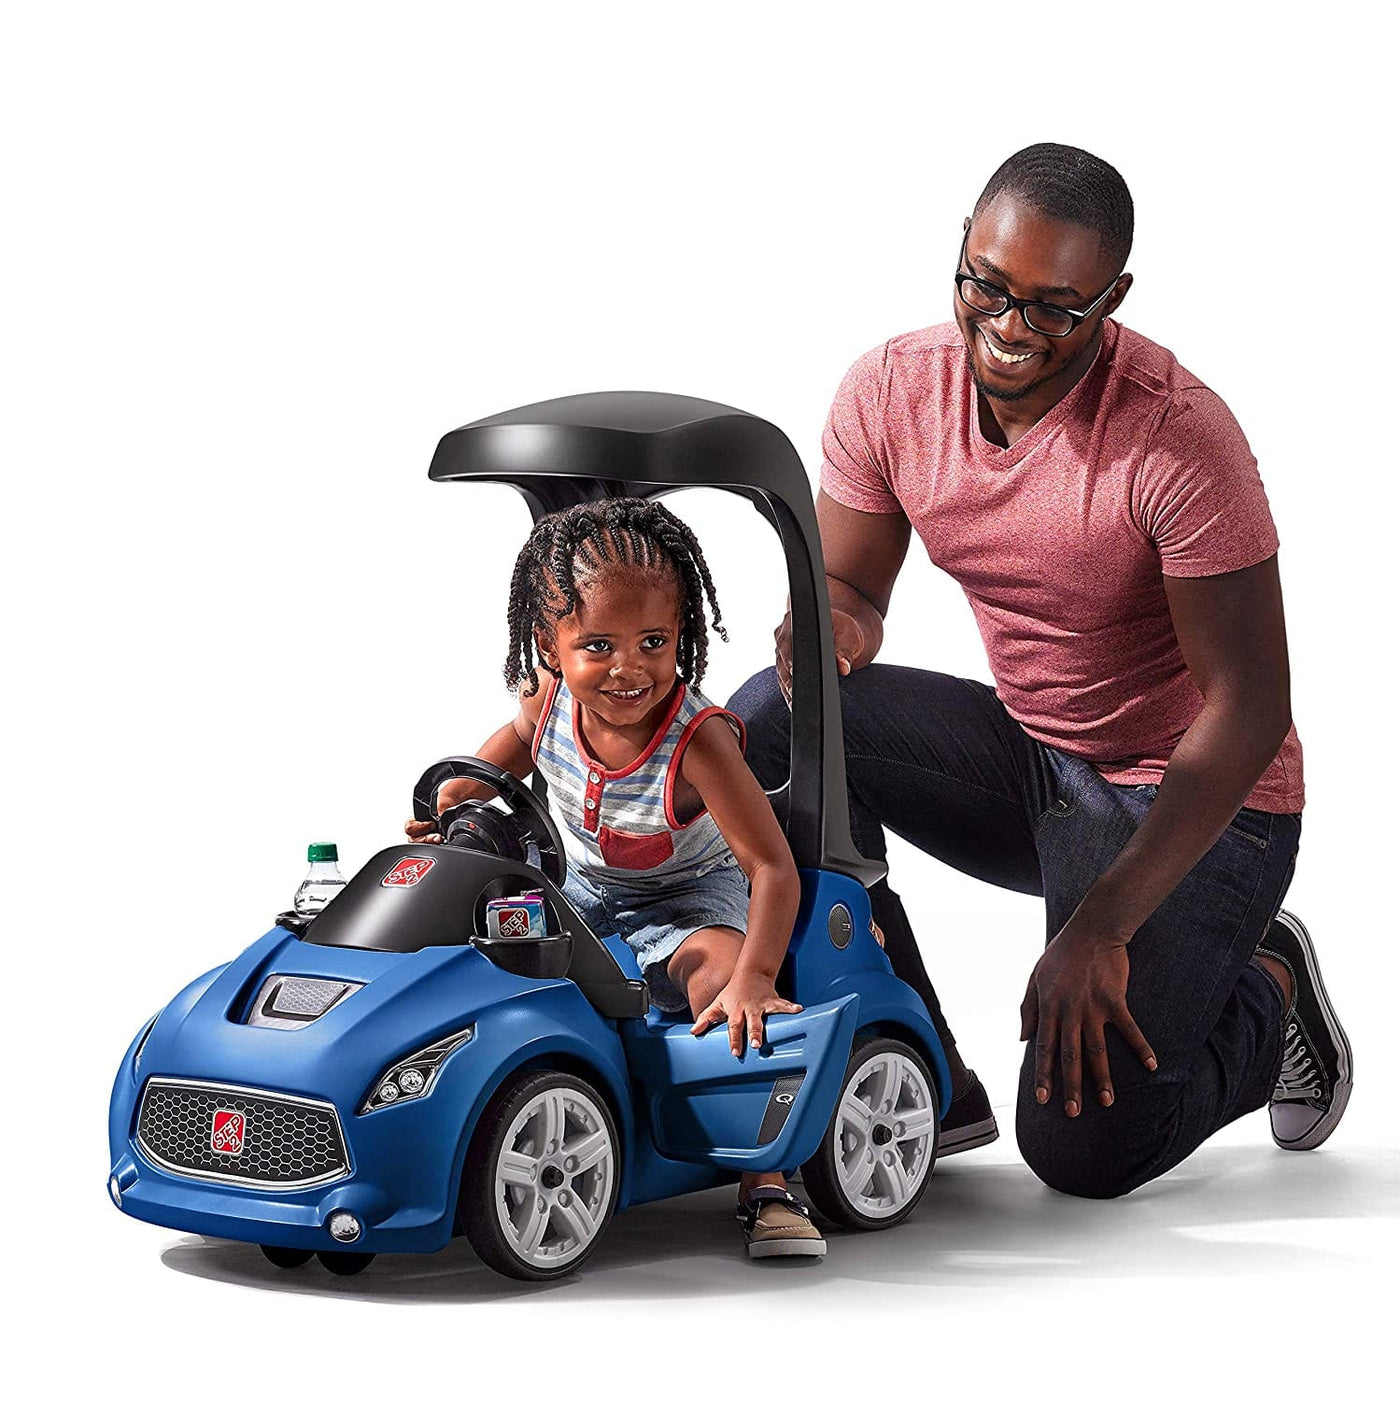 Turbo Coupe Foot to Floor Rideon (Blue) | Step2 by STEP2, USA Toy